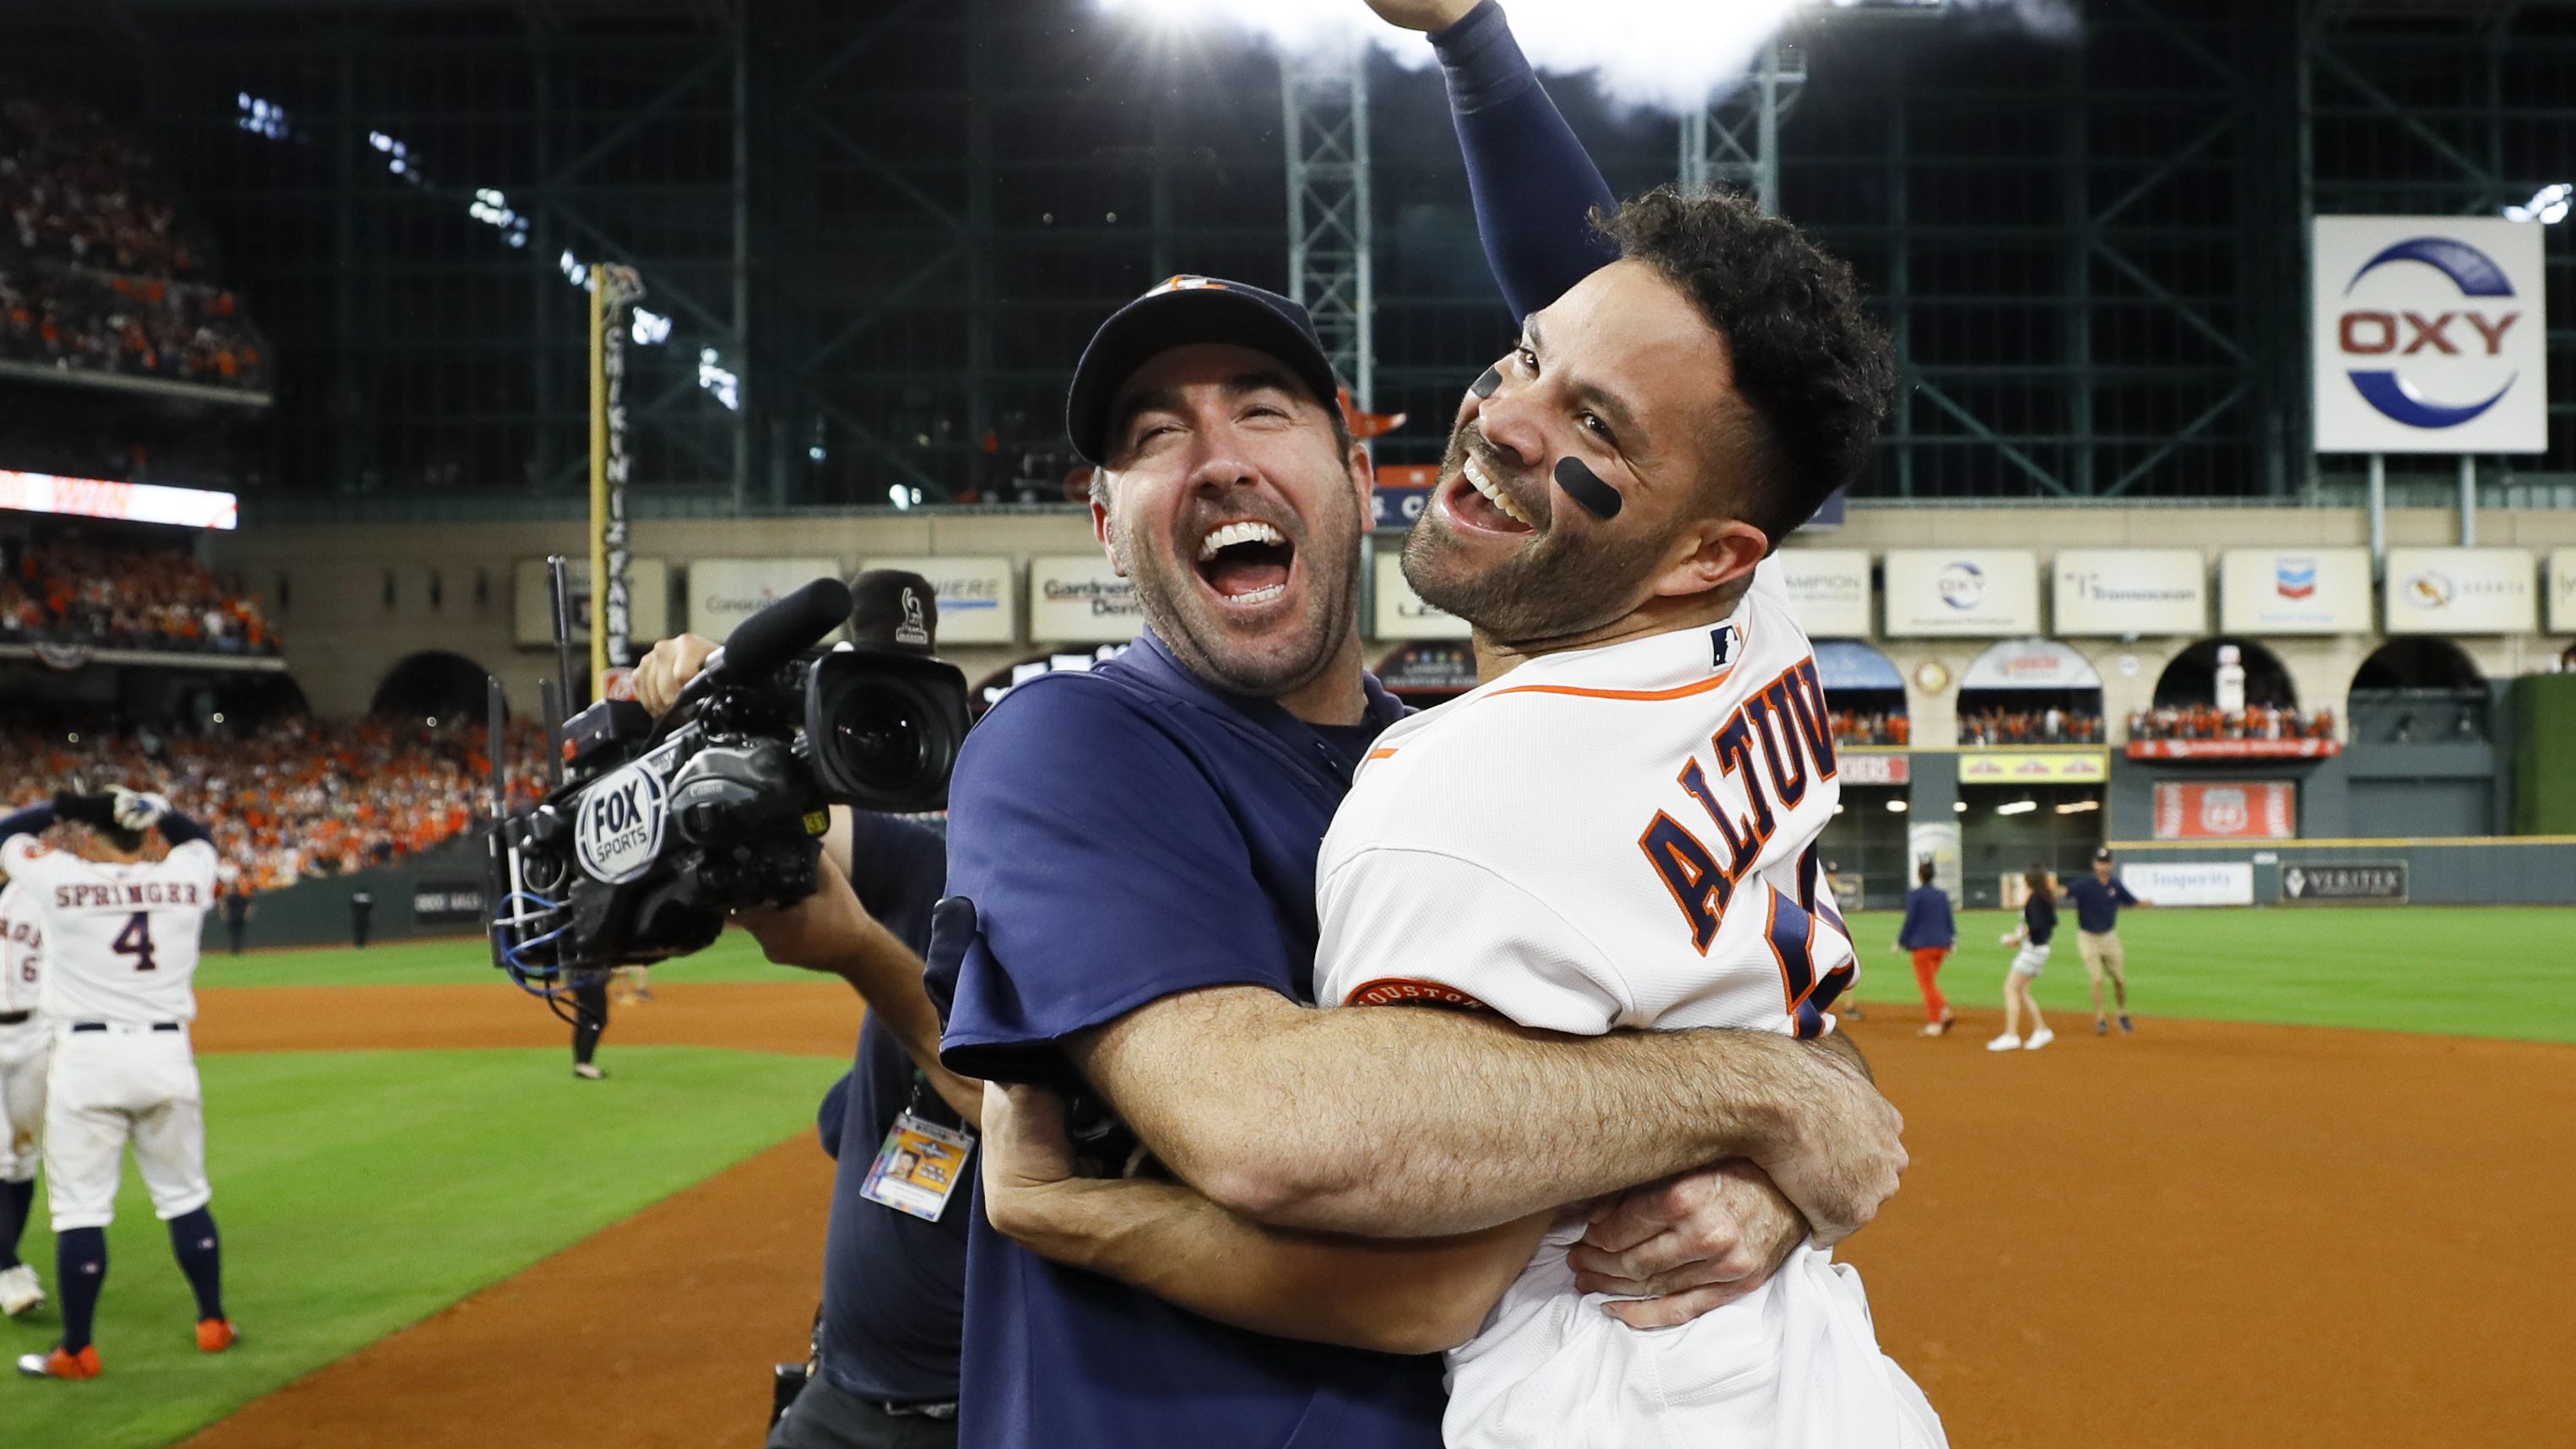 Houston Astros' Jose Altuve, right, and starting pitcher Justin Verlander celebrate after winning Game 6 of baseball's American League Championship Series against the New York Yankees. 